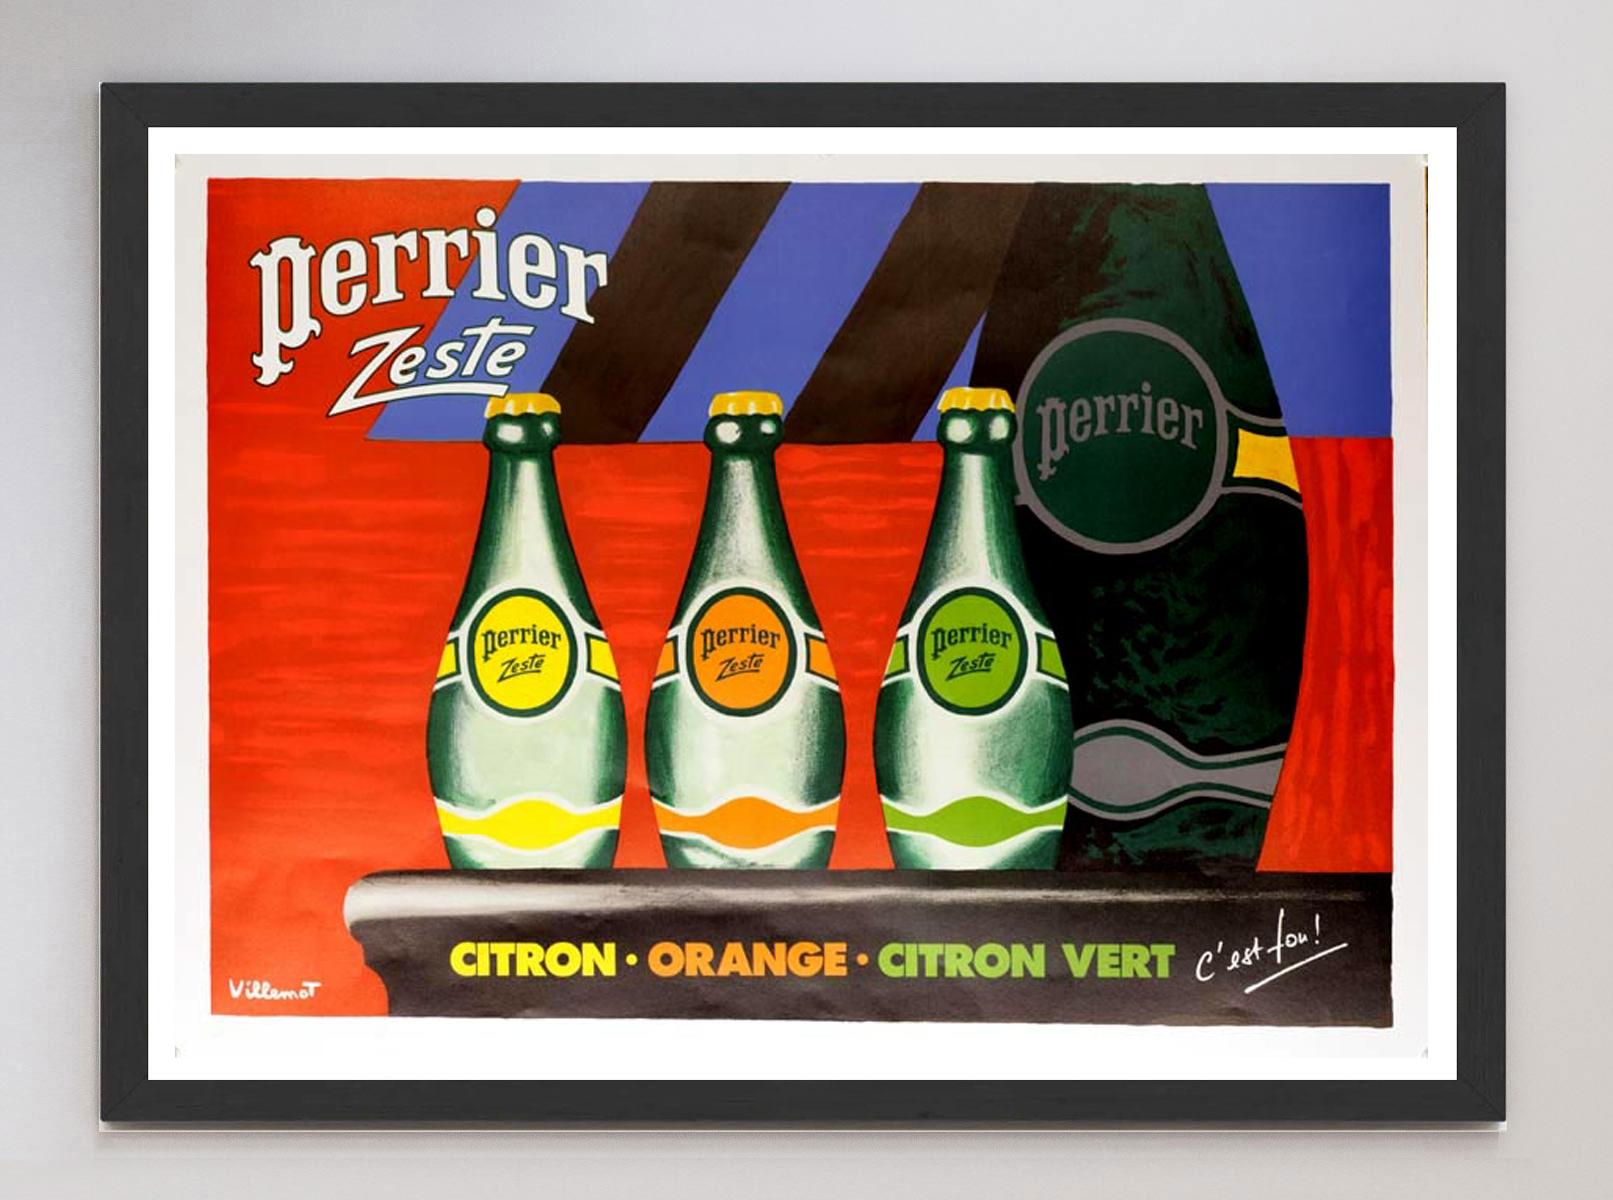 This beautiful art deco piece for Perrier was designed by the iconic poster and graphic designer Bernard Villemot. Best known for his collaborations with the likes of Orangina, Bally, Air France and of course Perrier, he is known as one of the